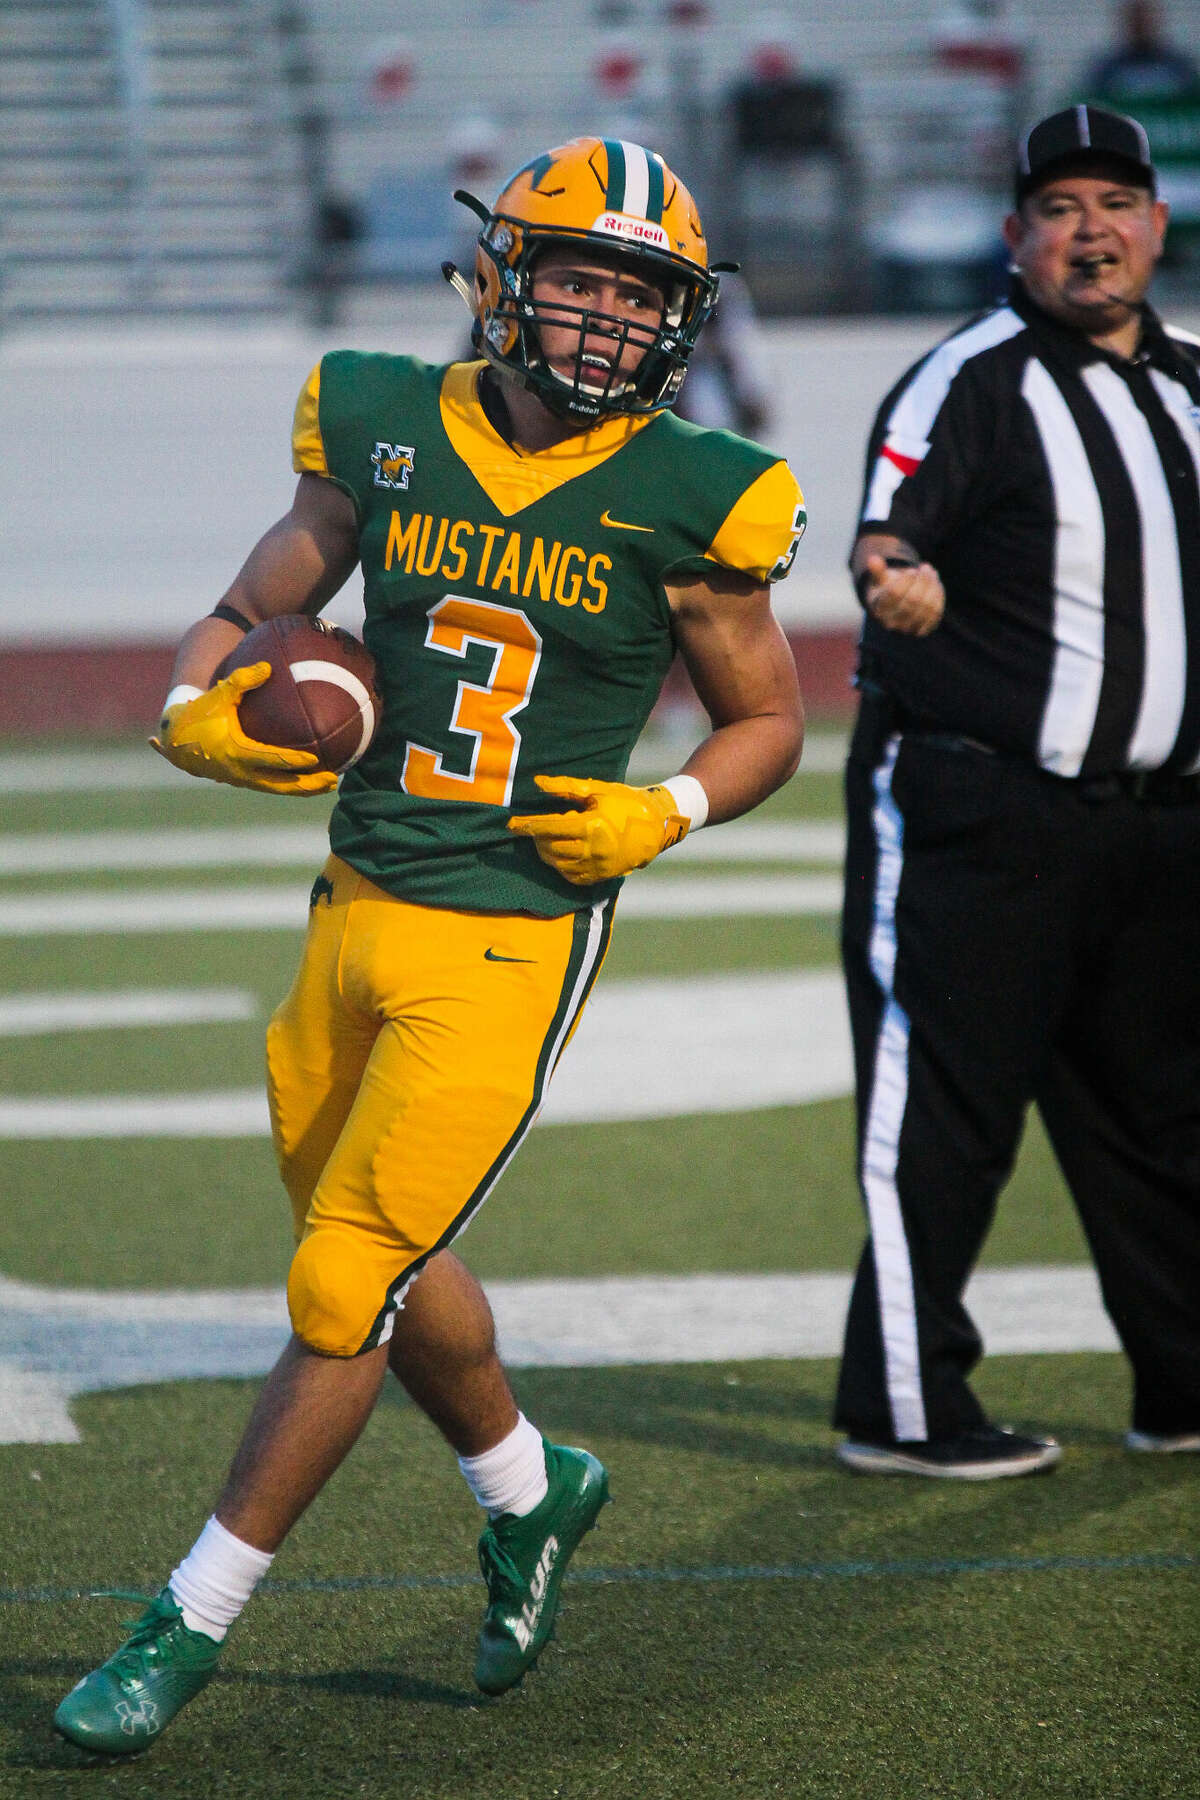 Ben Limon and the Nixon Mustangs are set to take on South San Antonio on Friday.